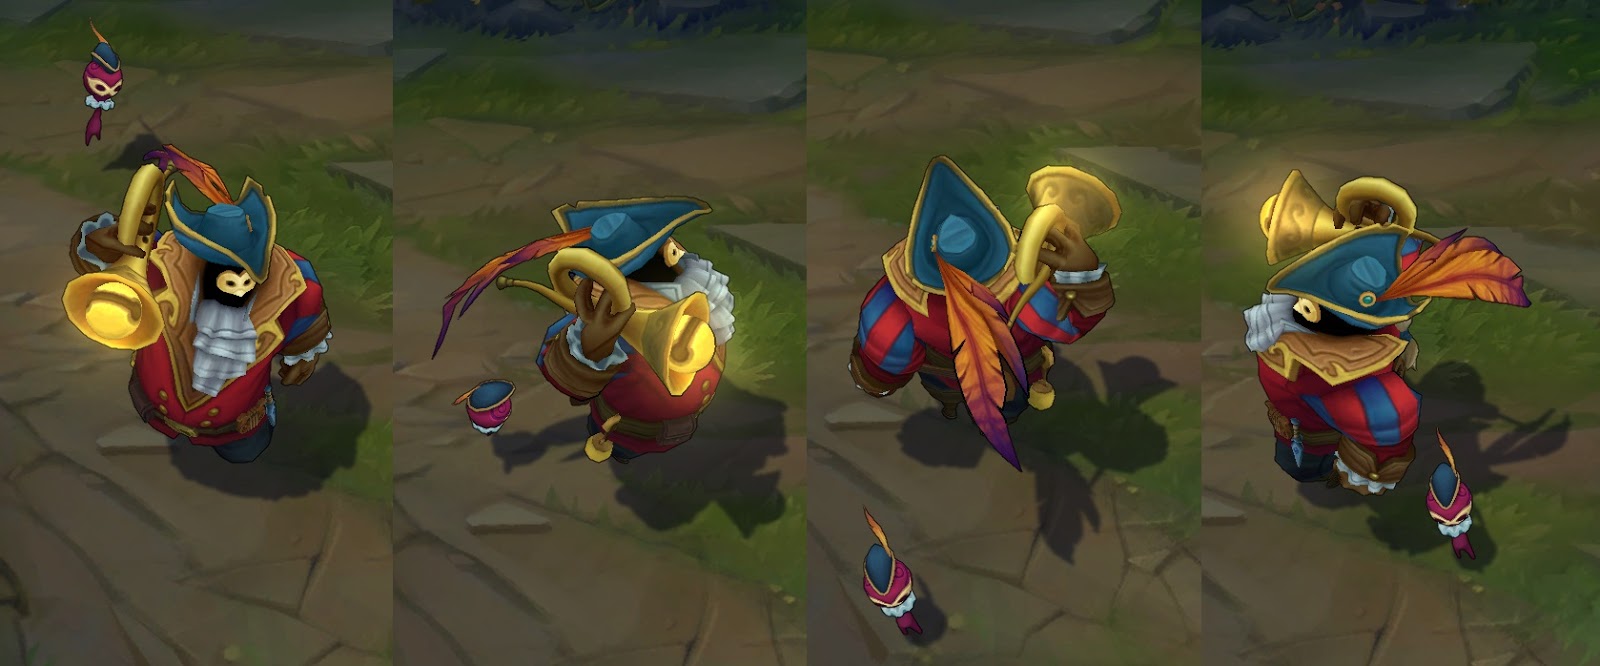 Bard Bard Skin for league of legends ingame picture.